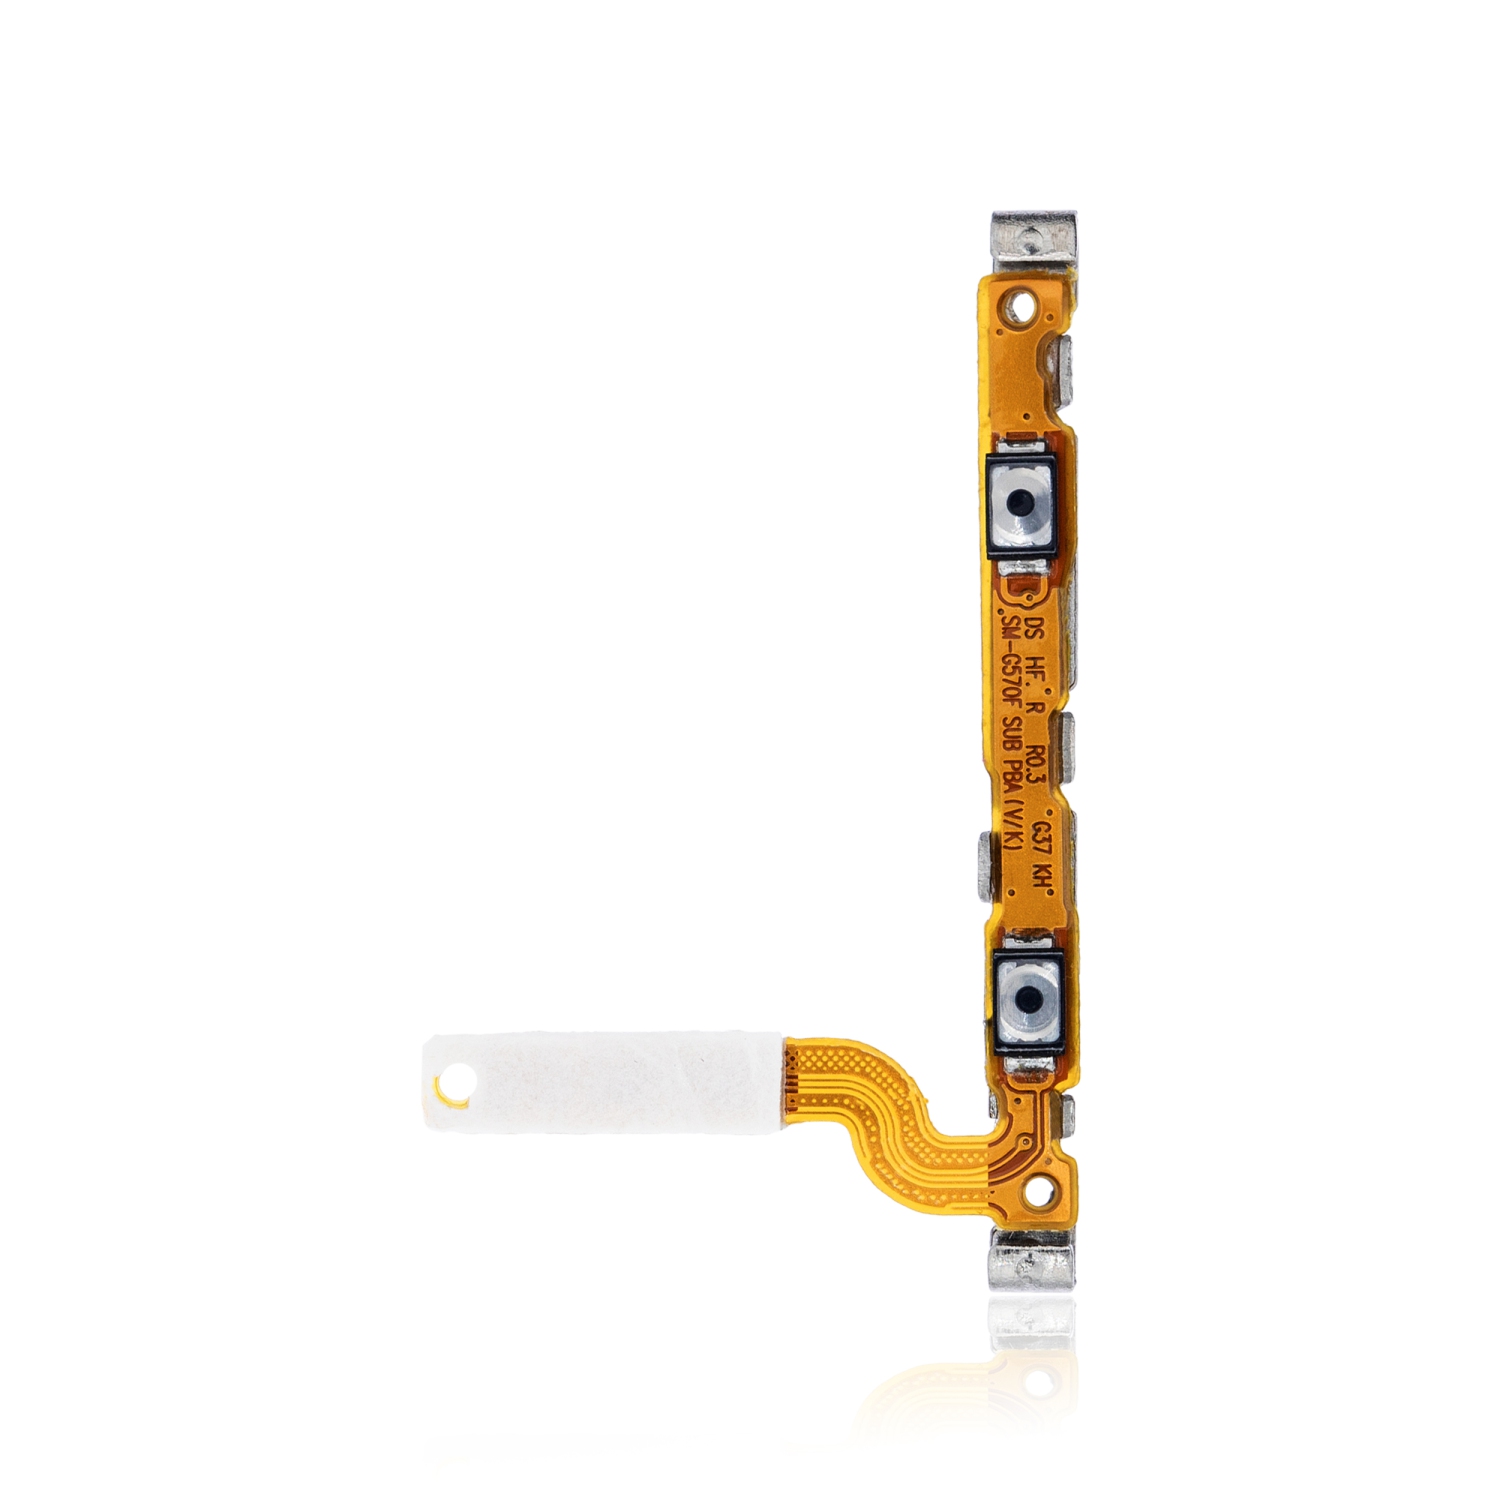 Replacement Volume Button Flex Cable Compatible For Samsung Galaxy J7 Prime (G610 / 2016)